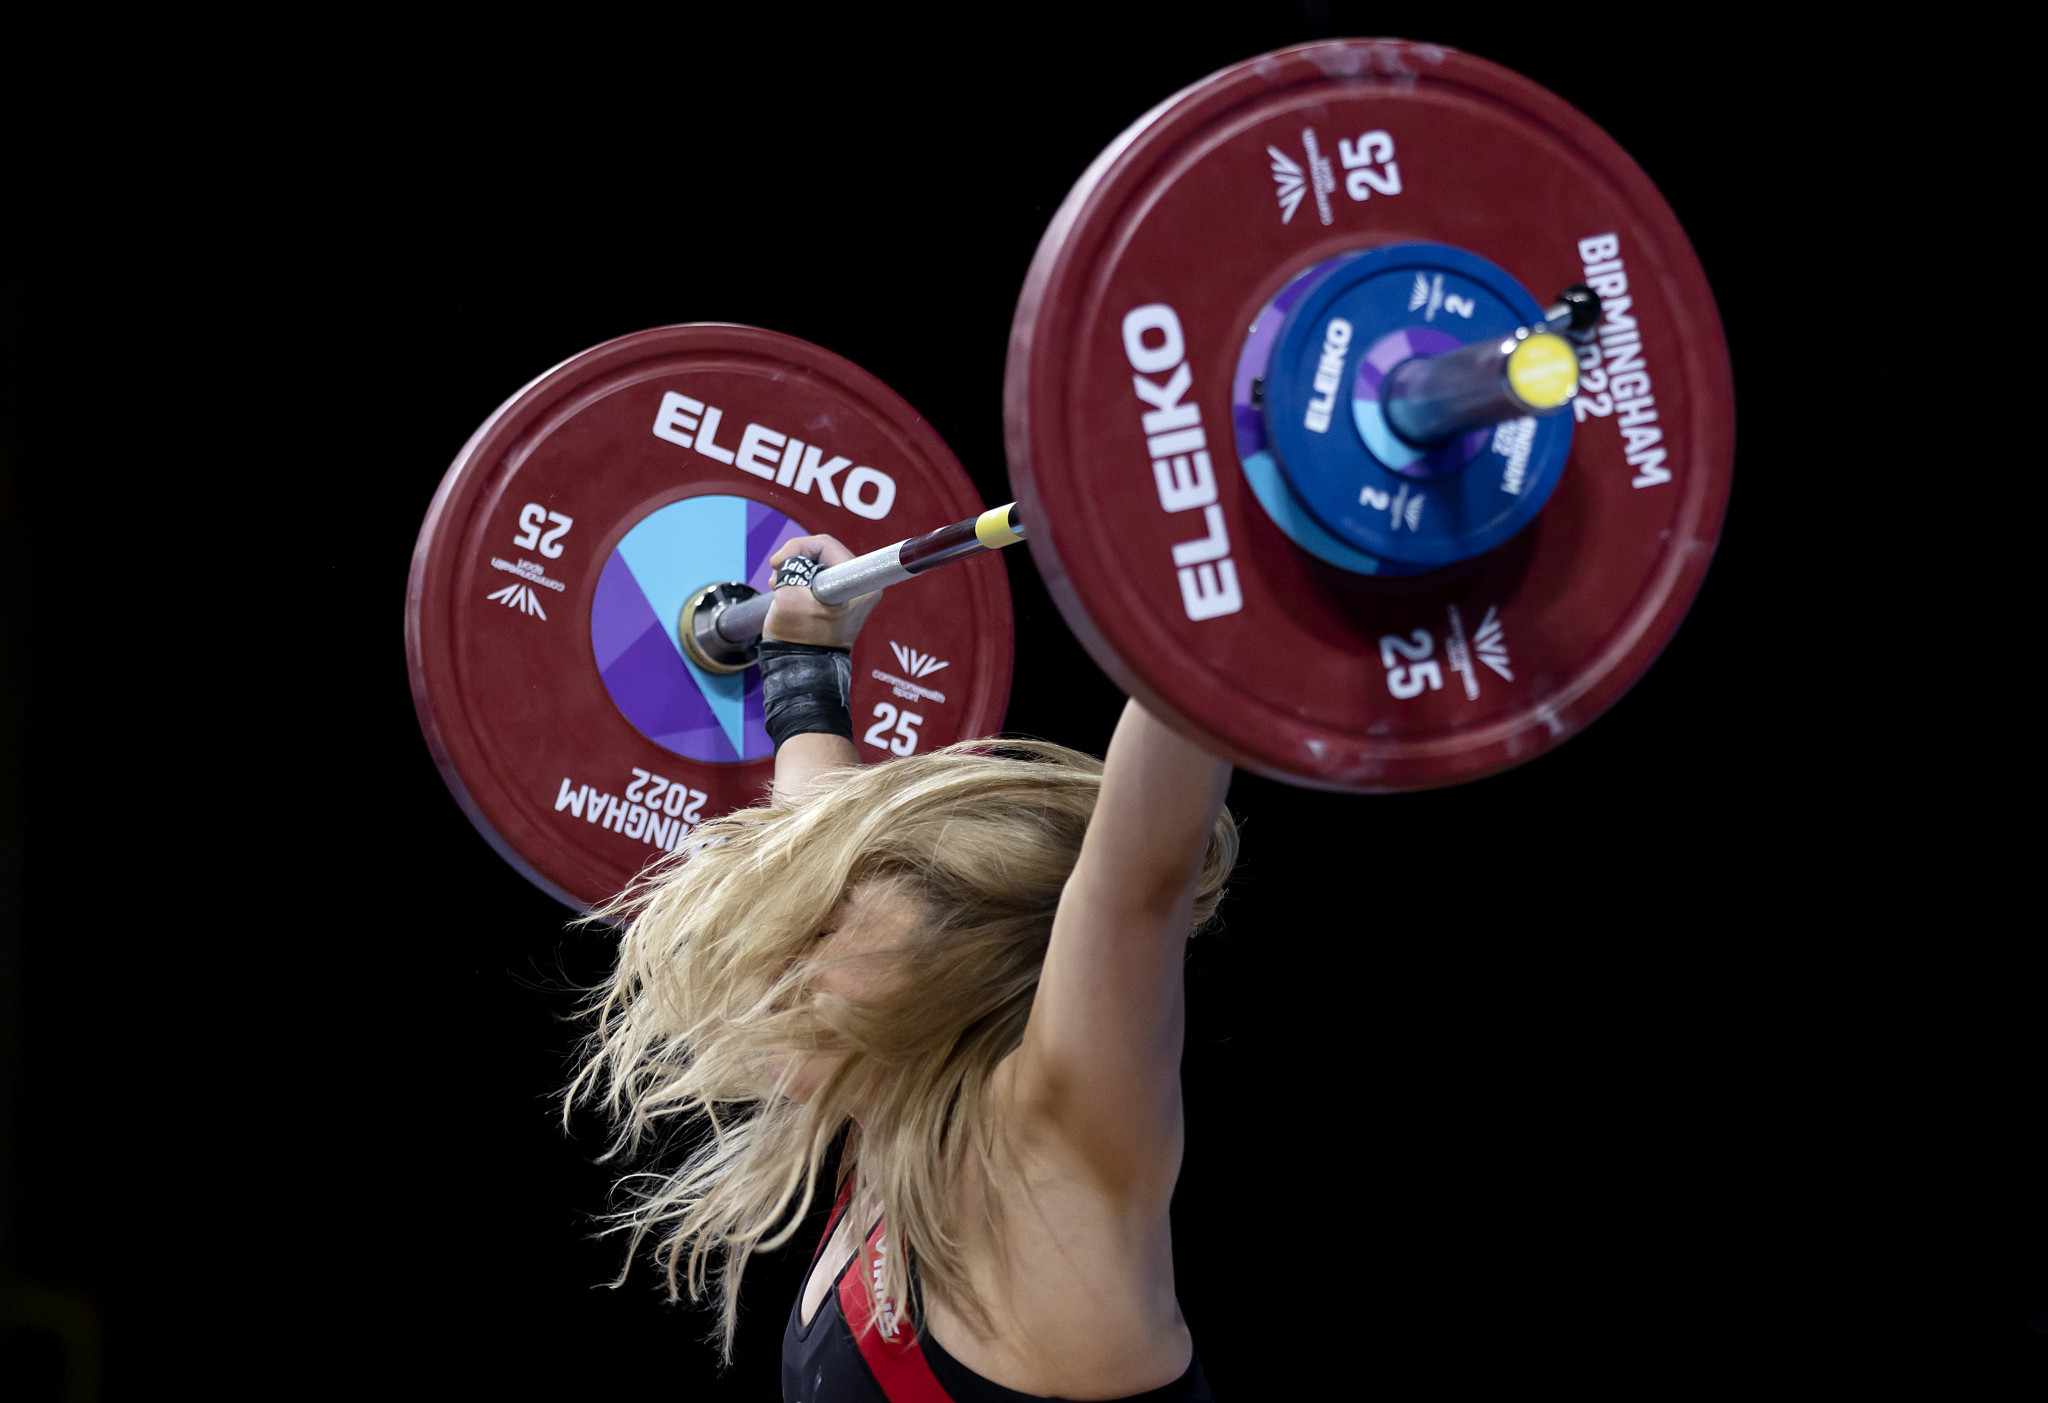 The IWF has promised to review the rule so it is fairer for female weightlifters ©Getty Images